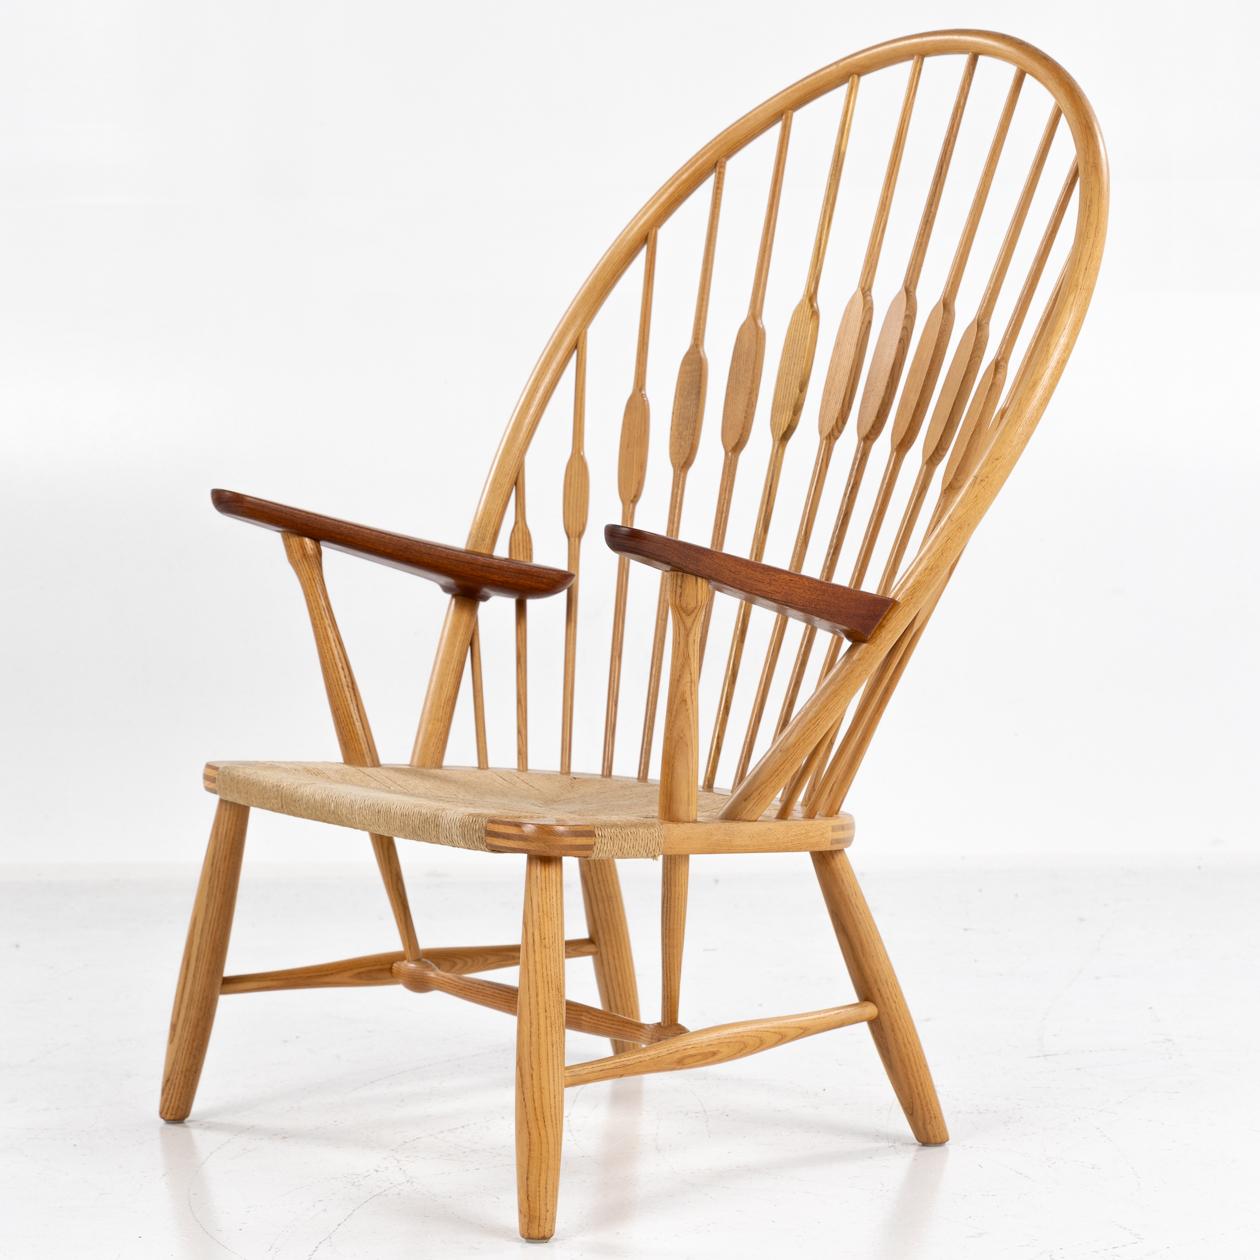 JH 550 - Peacock chair in ash, armrests in teak and seat of braided paper yarn. Architect Hans Wegner for cabinetmaker Johannes Hansen.